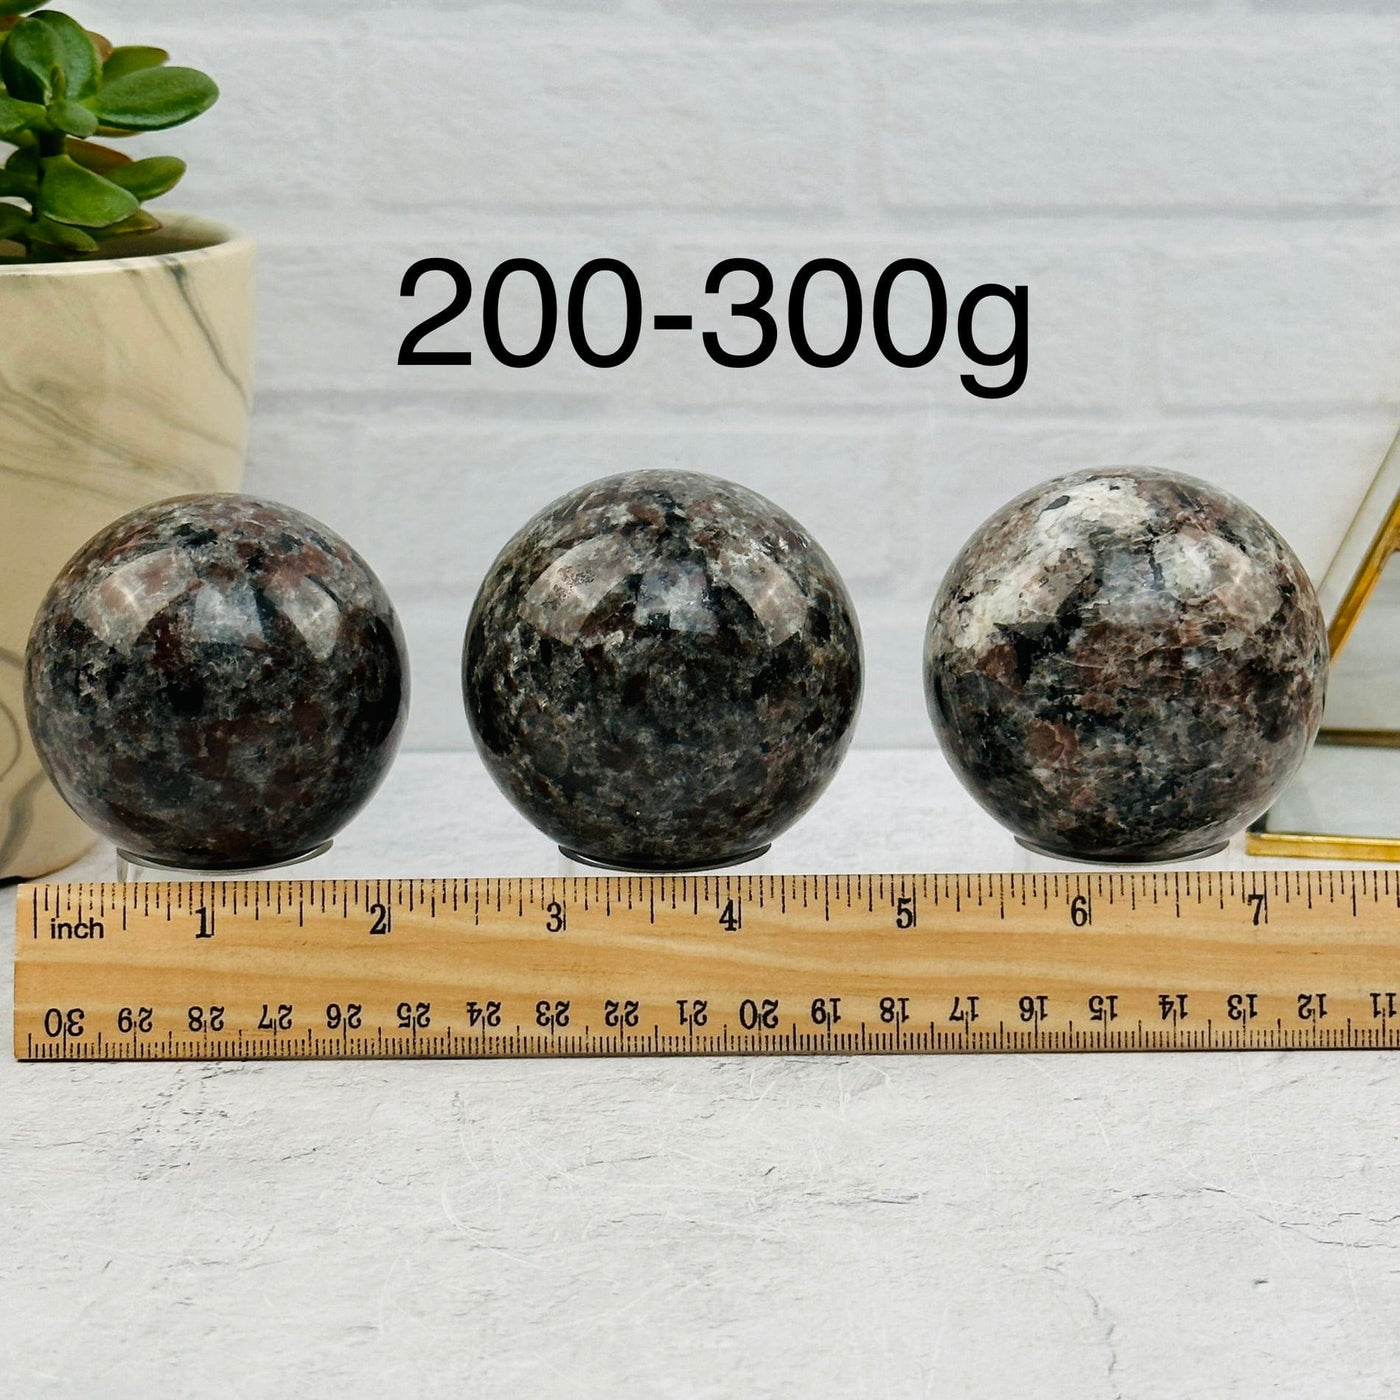 Yooperlite Spheres - By Weight - next to a ruler for size reference 